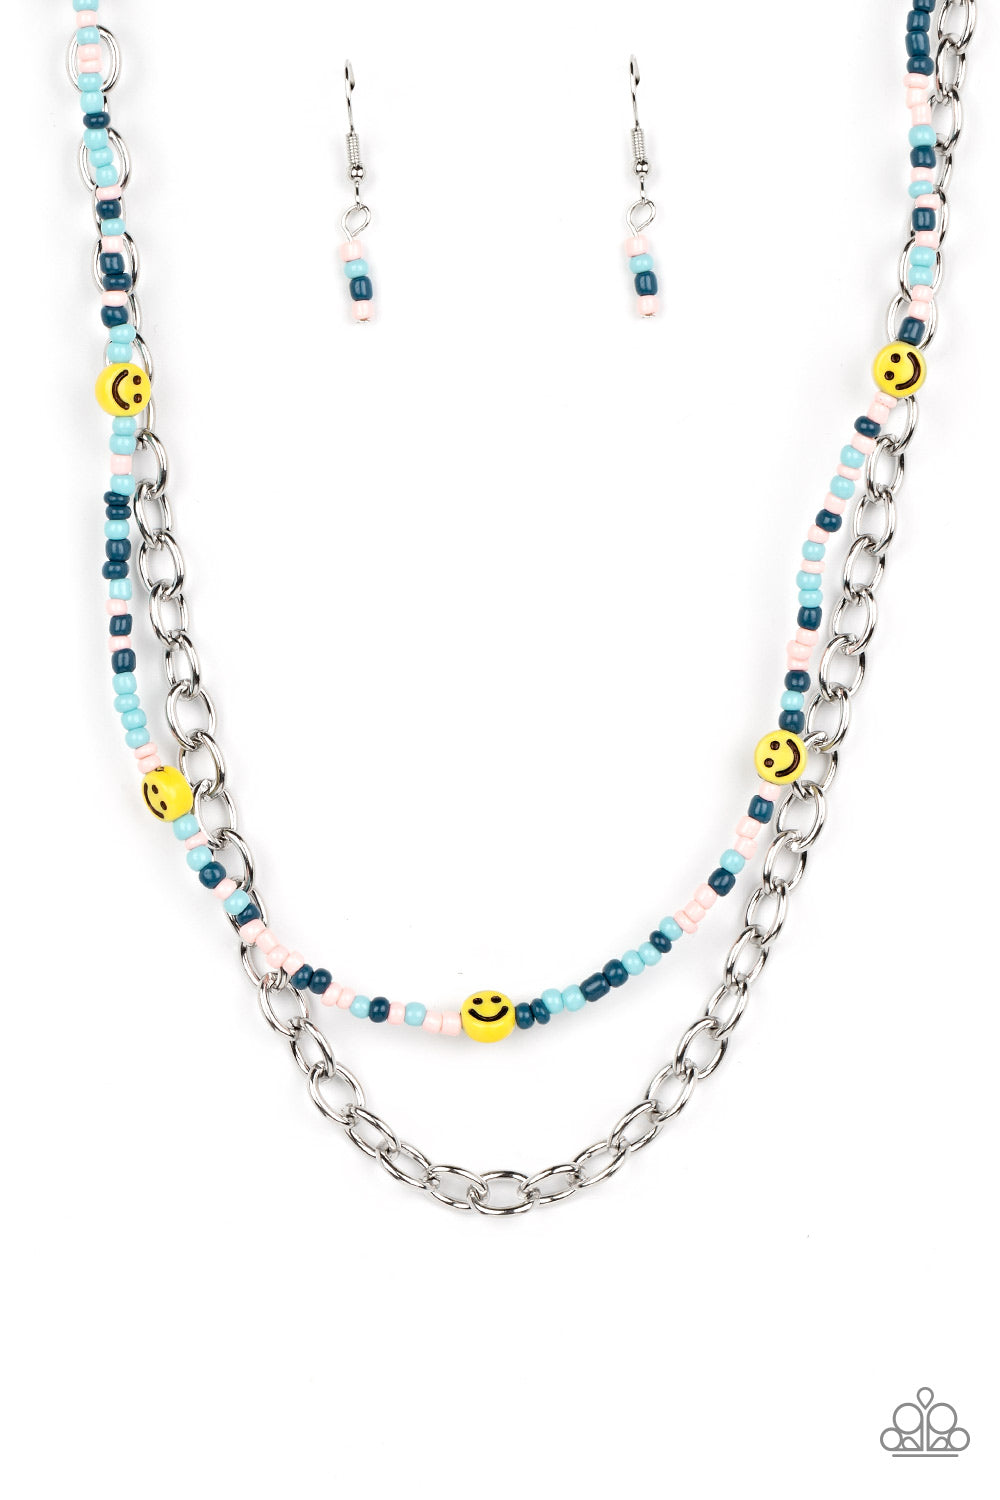 Happy Looks Good on You - blue - Paparazzi necklace